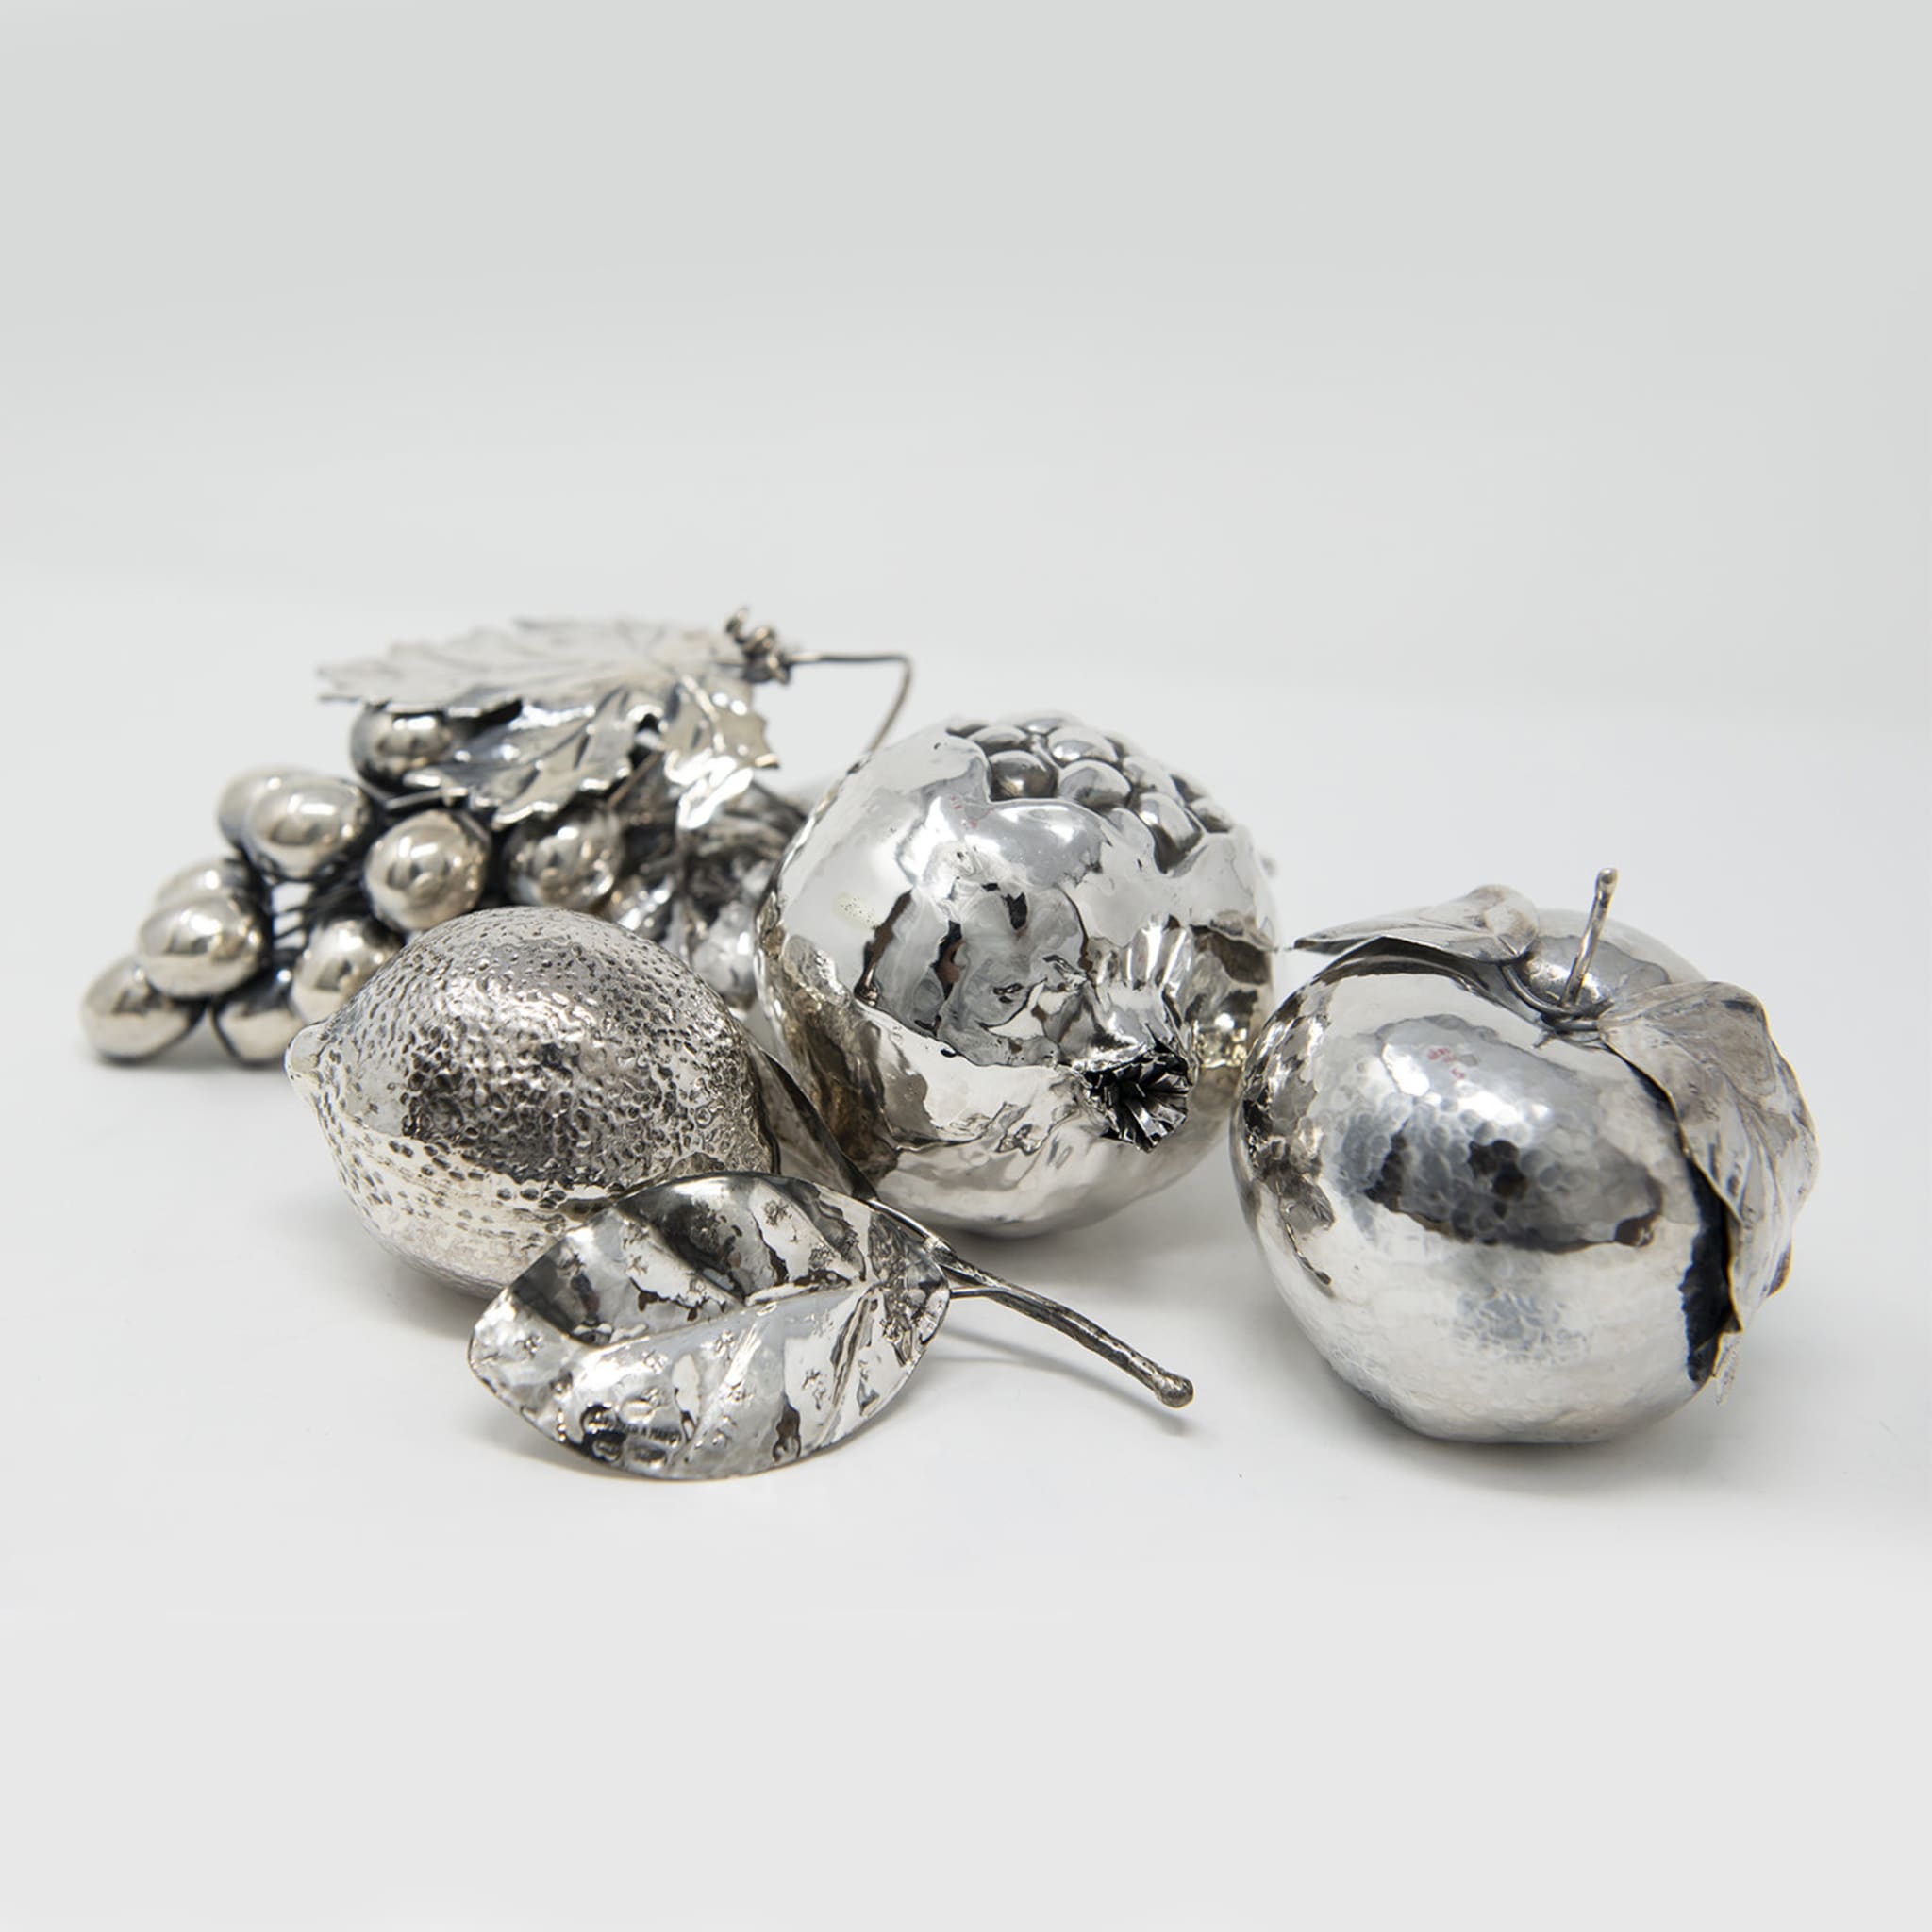 Silver Apple and Leaves Decoration - Alternative view 1